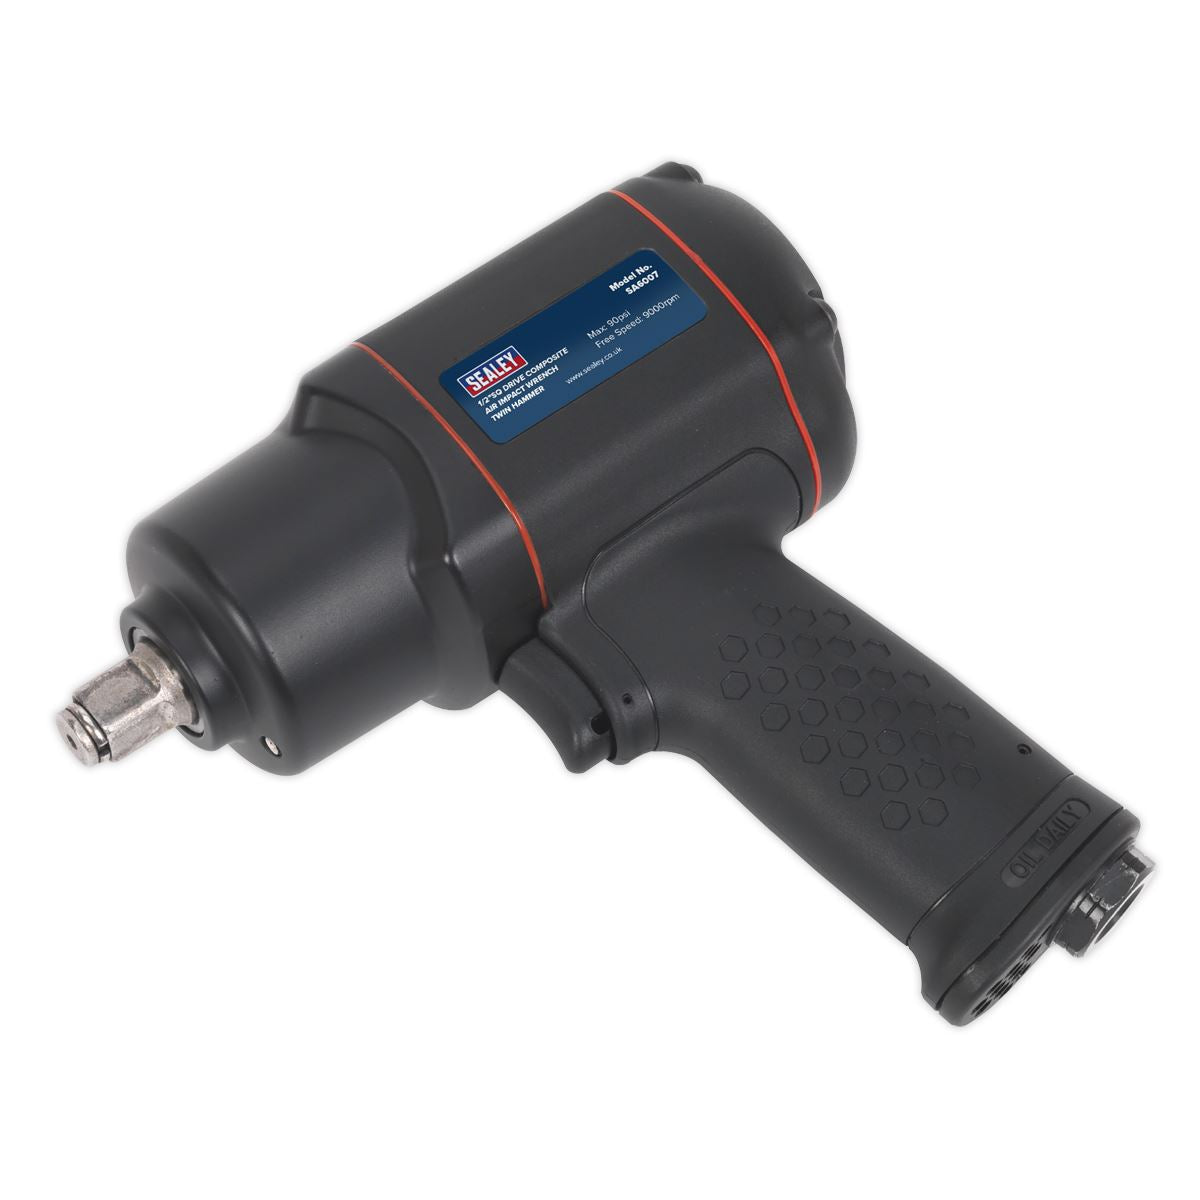 Sealey Premier Air Impact Wrench 1/2"Sq Drive - Twin Hammer